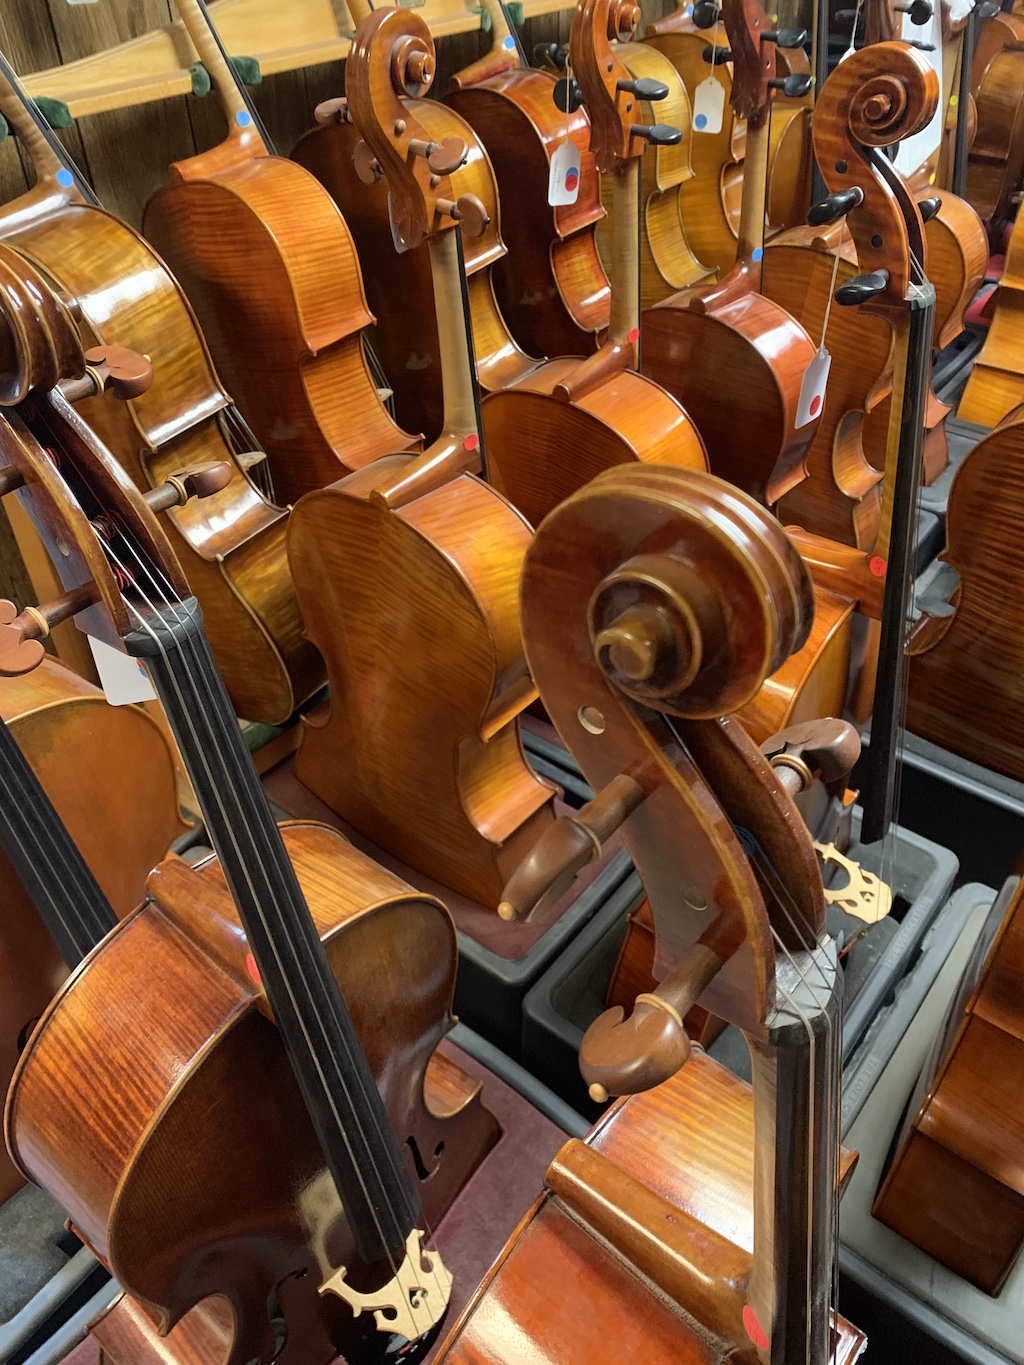 A selection of cellos at The Loft Violin Shop in Columbus, OH